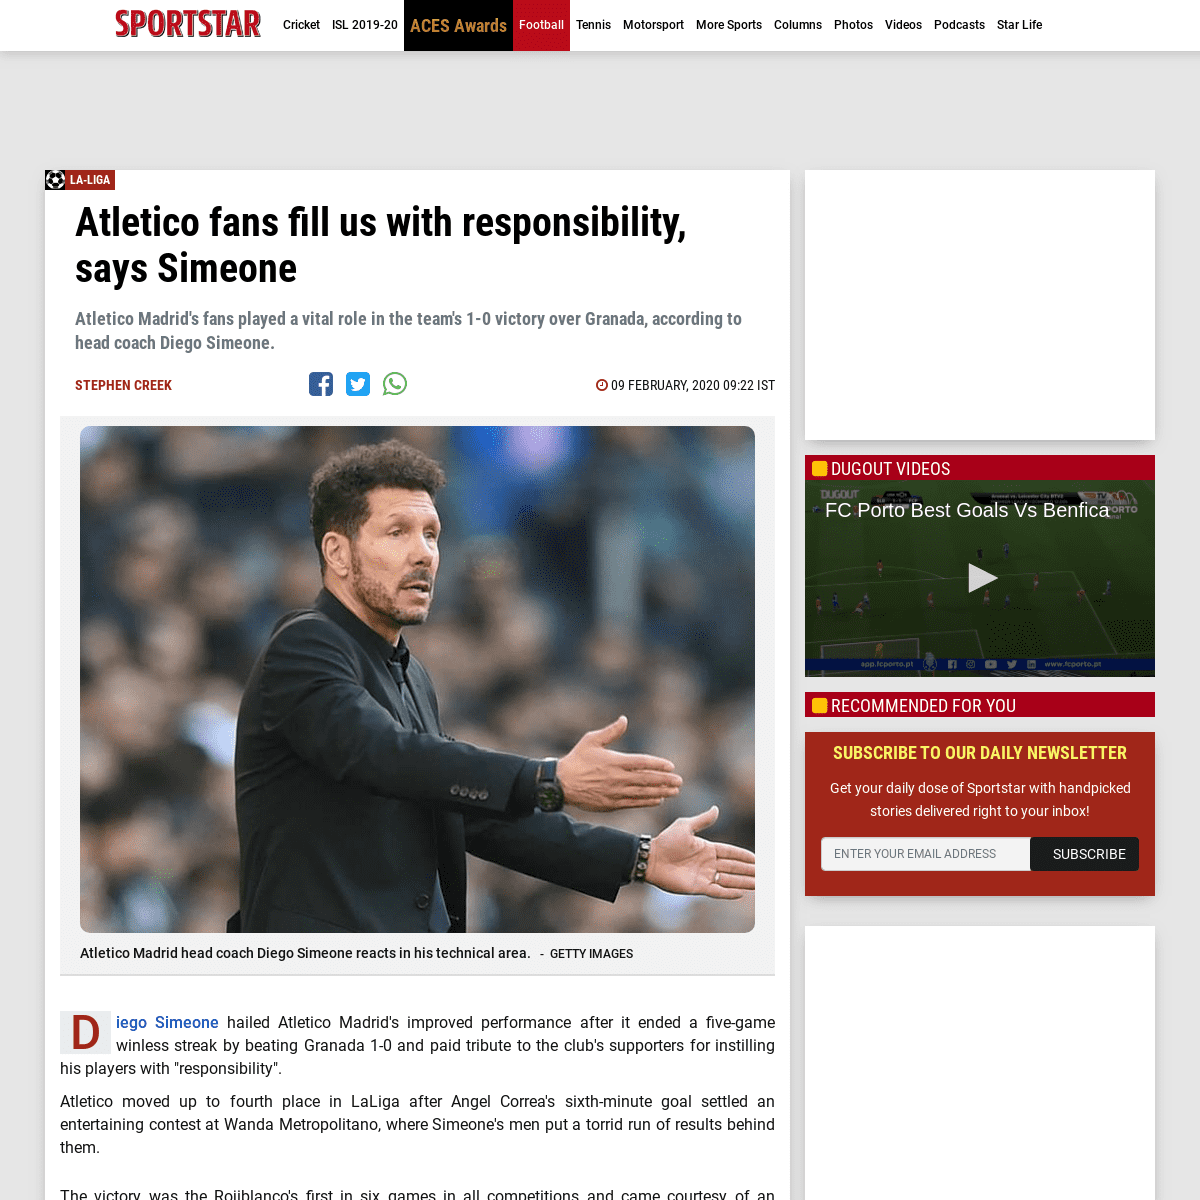 A complete backup of sportstar.thehindu.com/football/la-liga/atletico-fans-fill-us-with-responsibility-says-simeone/article30774